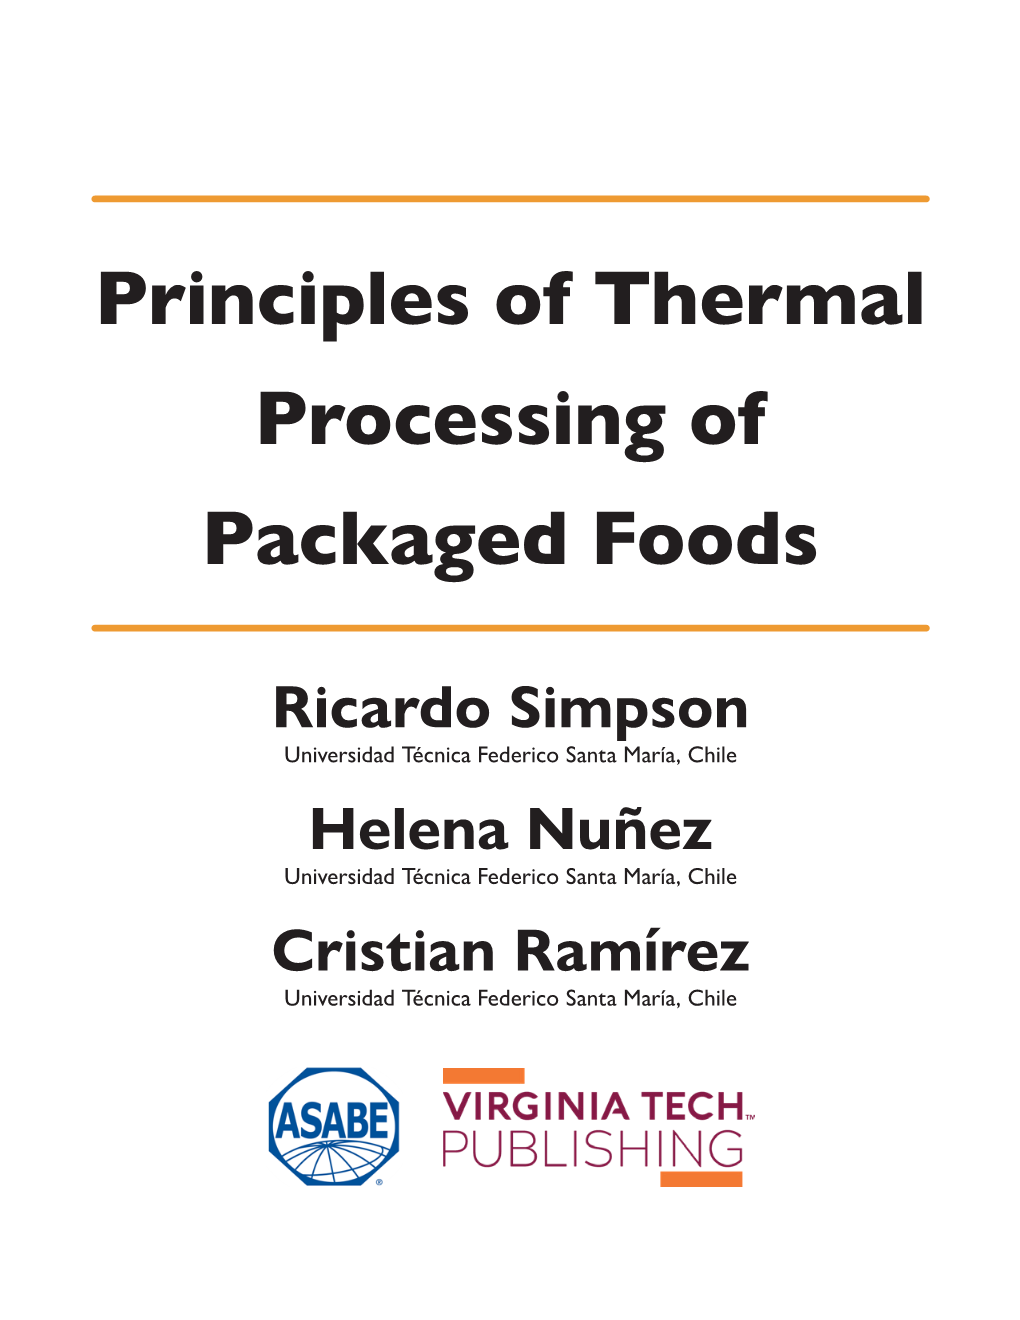 Principles of Thermal Processing of Packaged Foods